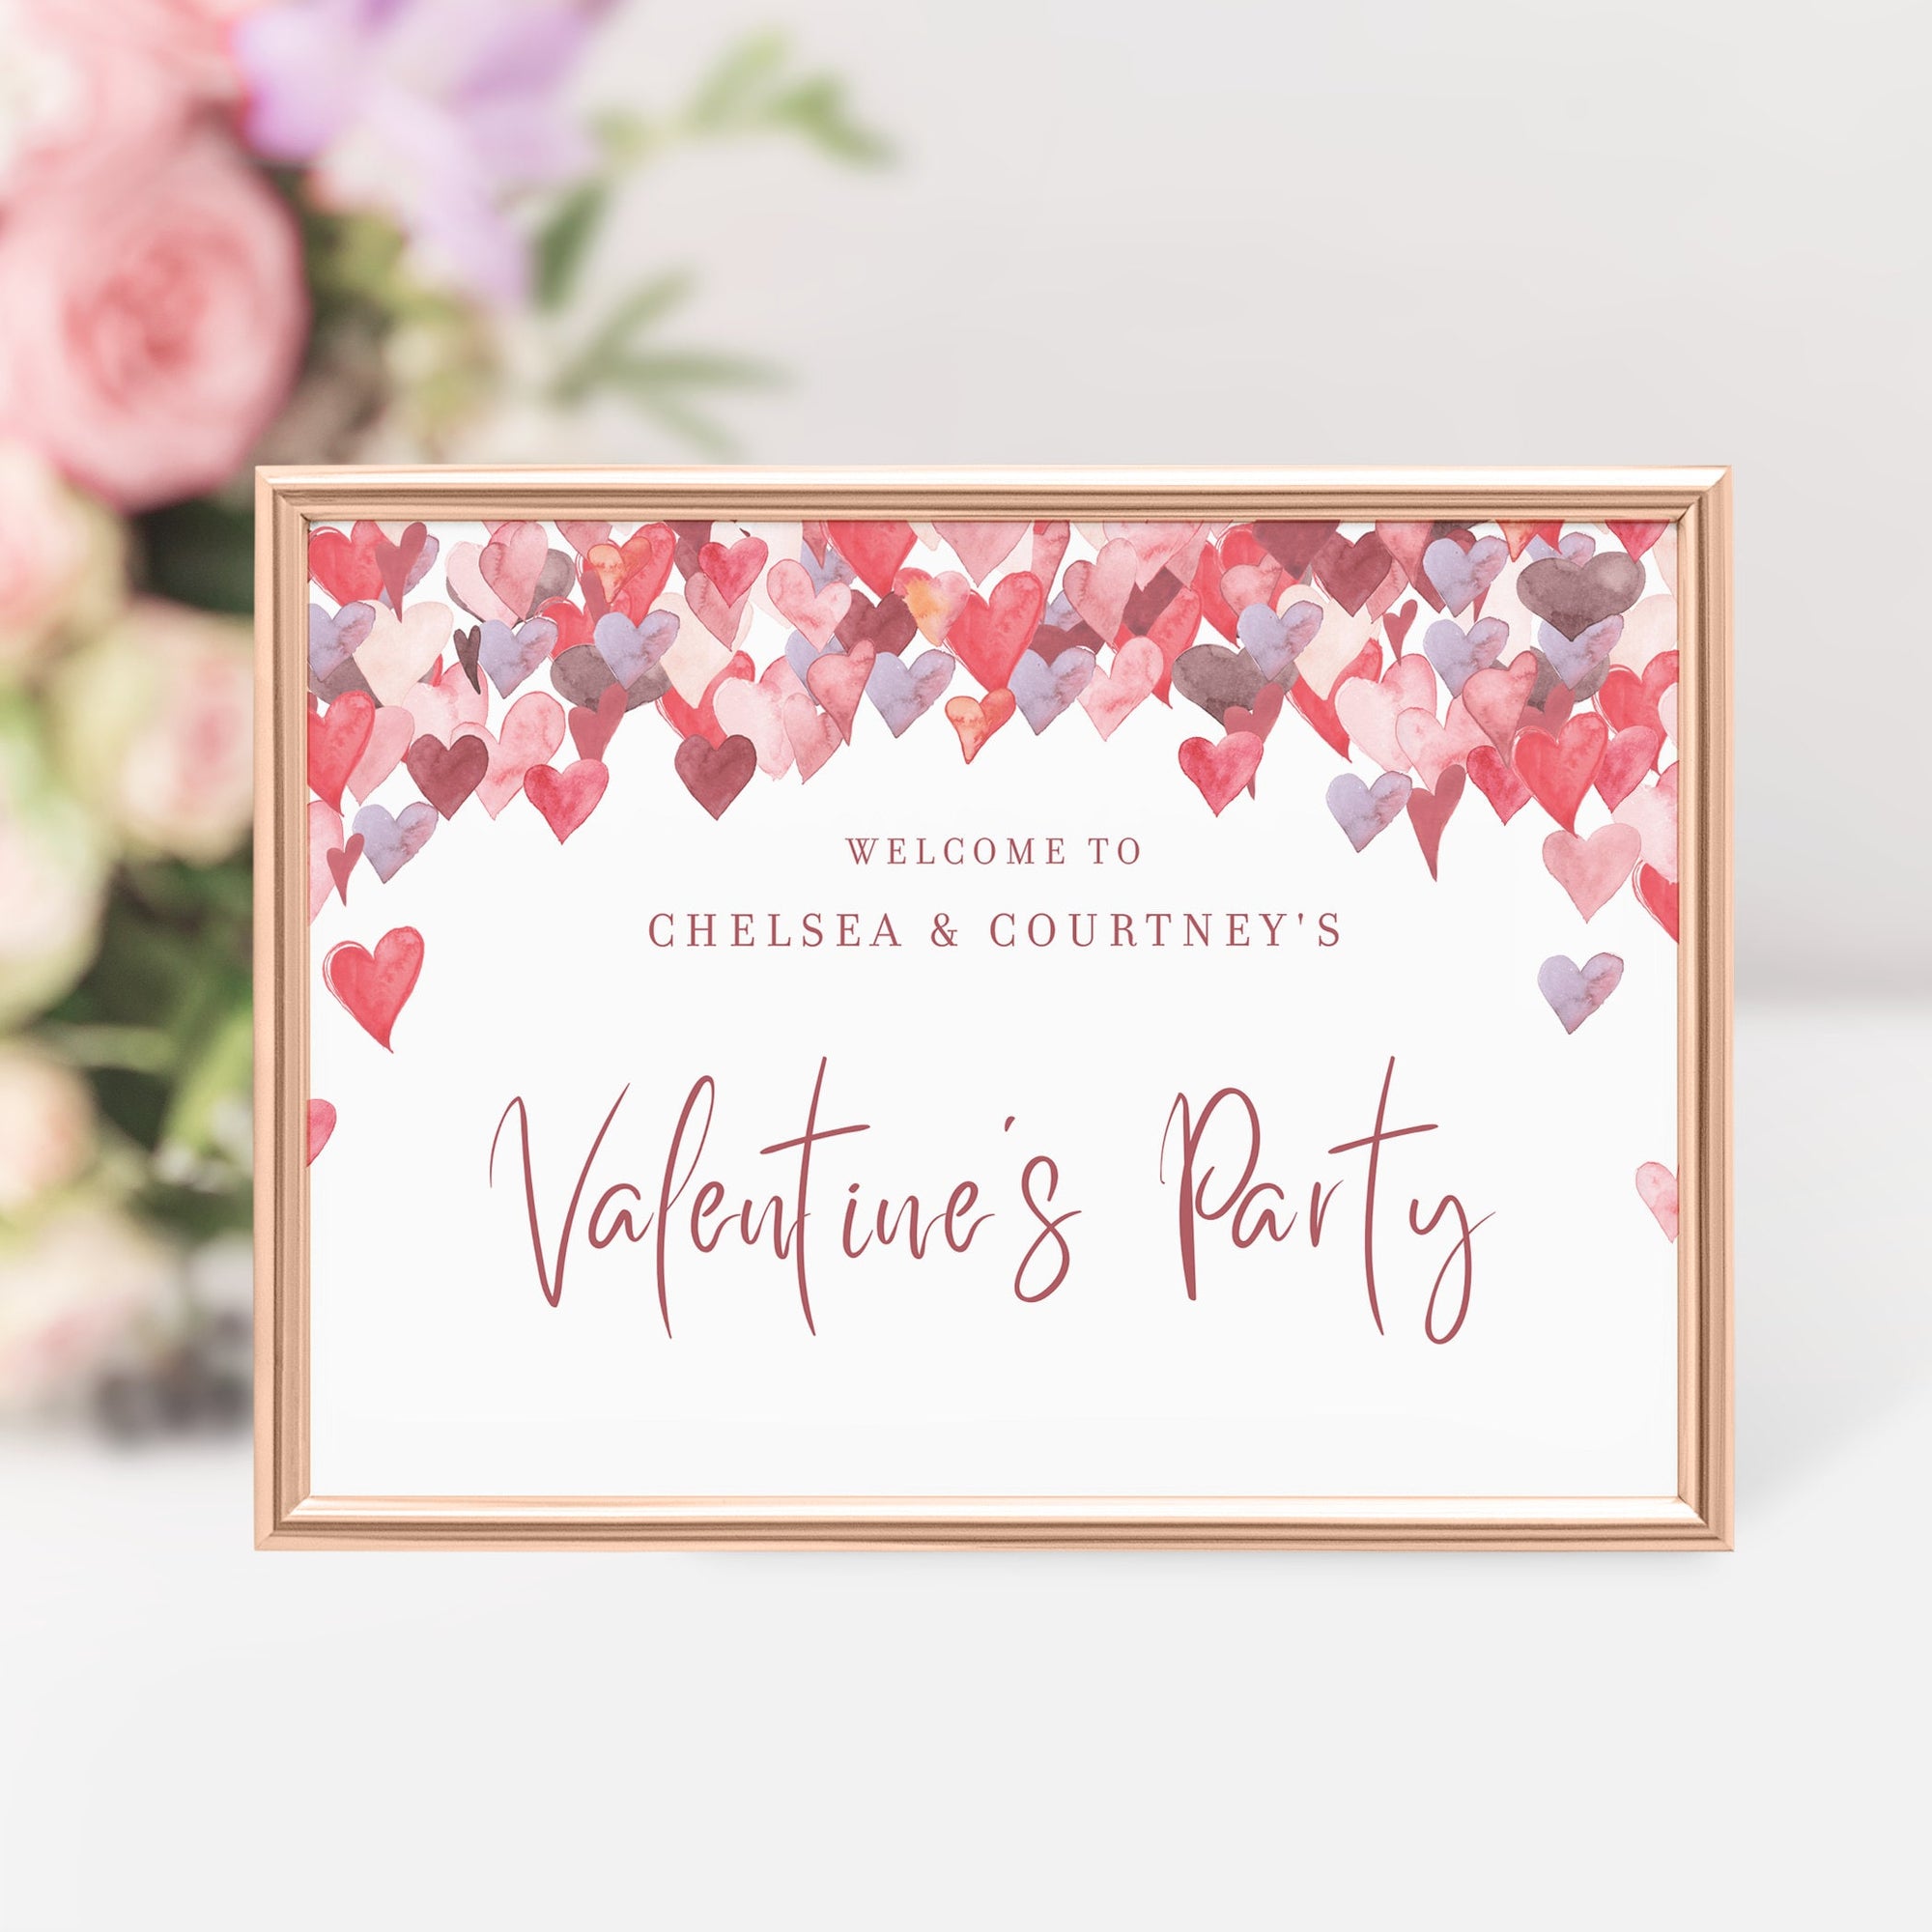 Valentines Day Party Welcome Sign Template, Printable Valentines Party Sign, Valentines Day Decorations, INSTANT DOWNLOAD - VH100